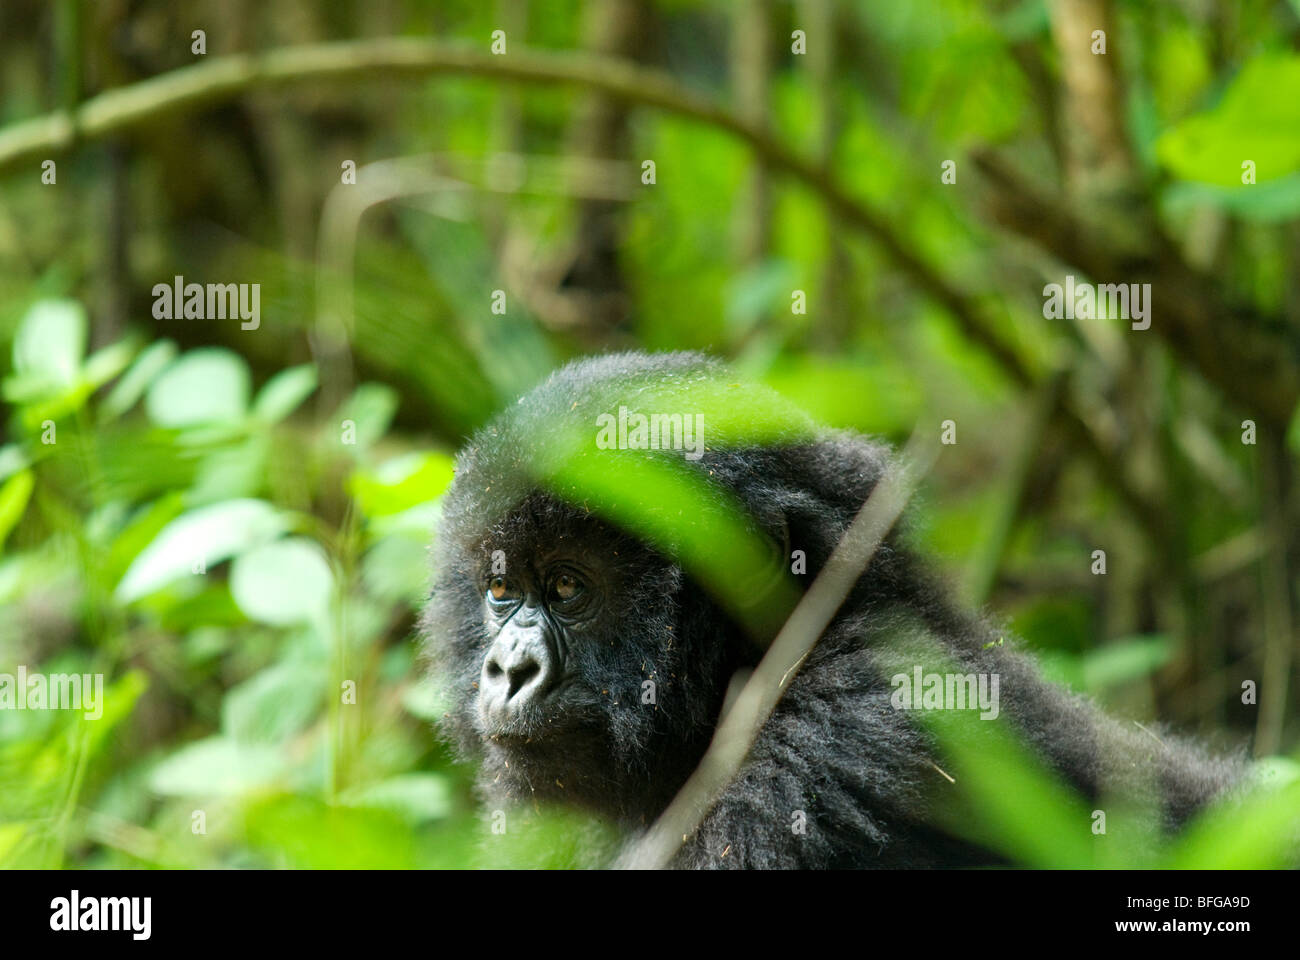 young gorilla in parc national des volcans, rwanda Stock Photo